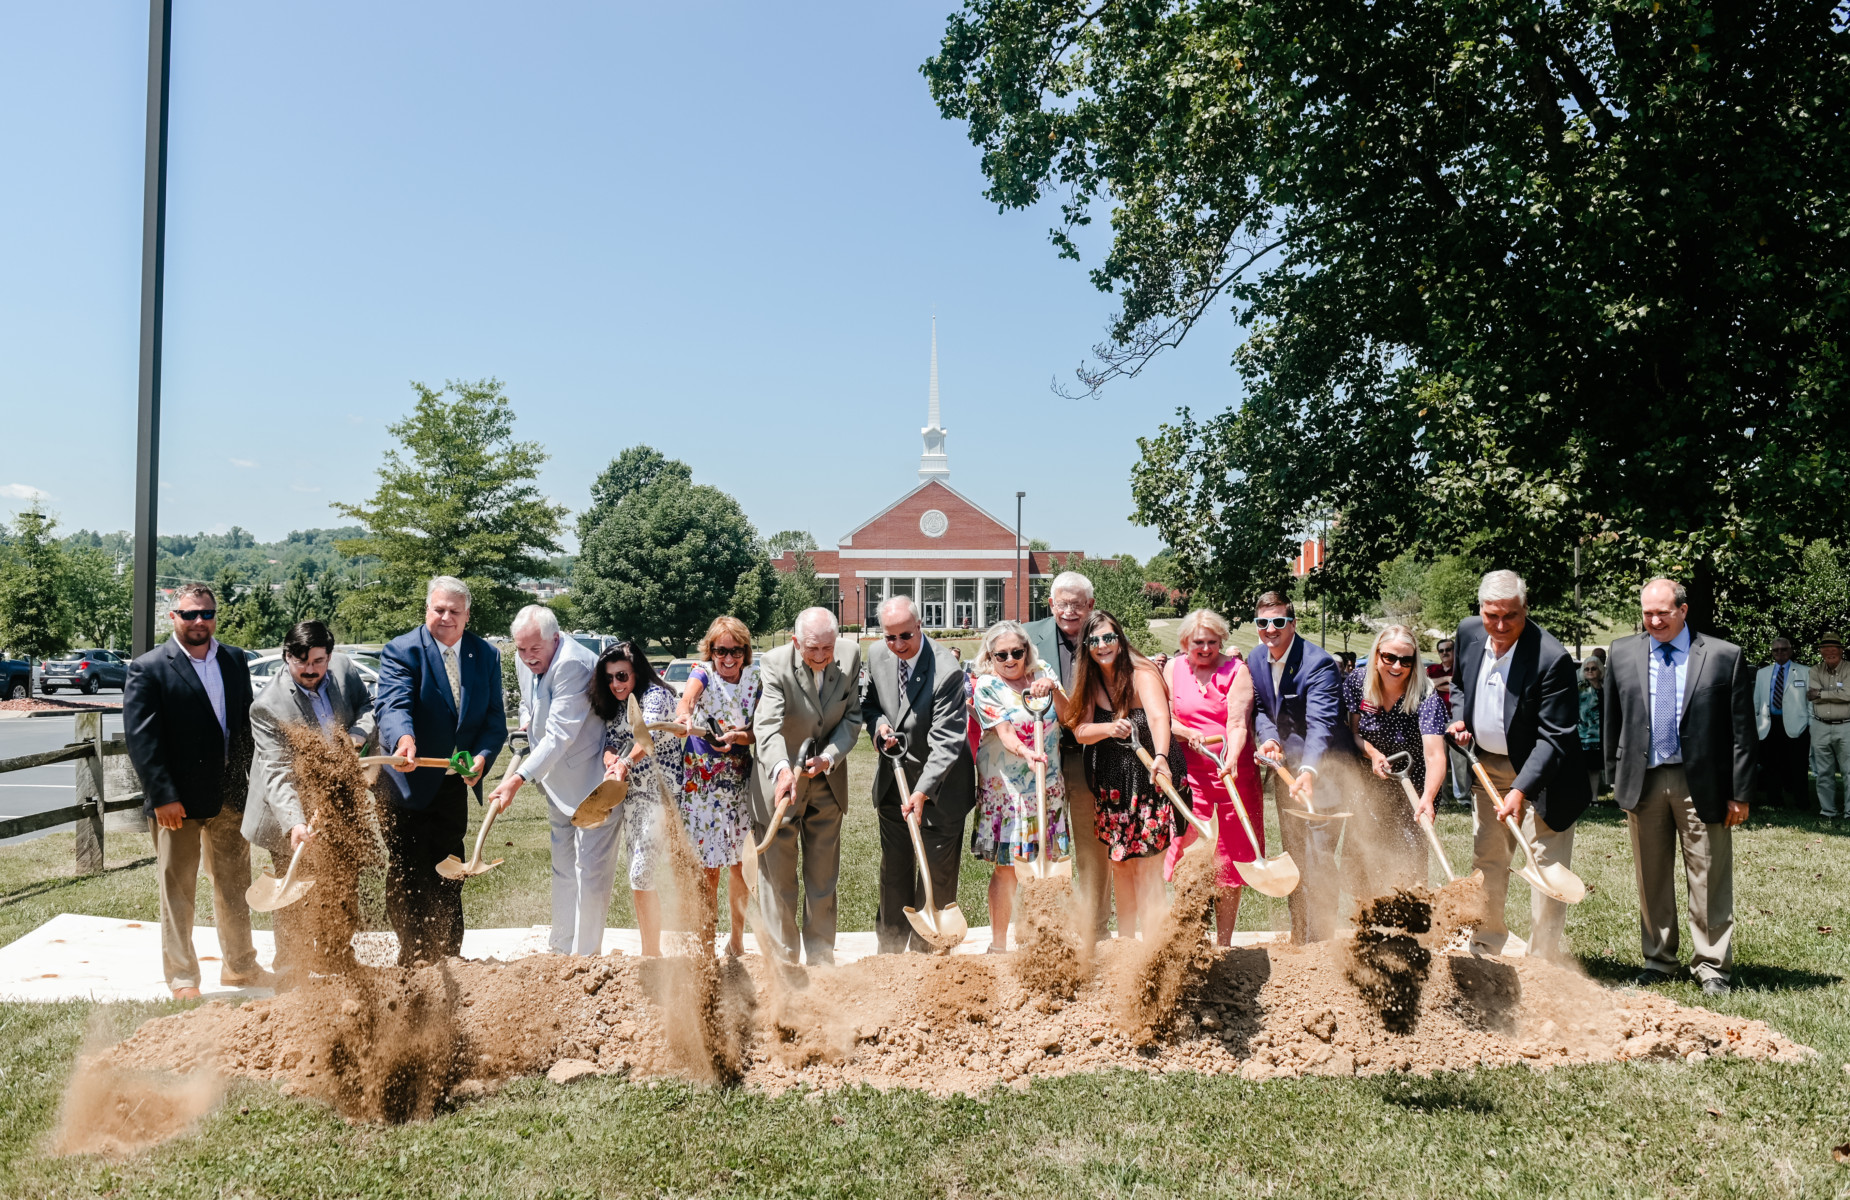 Campbellsville University holds Heilman Wellness Center dedication and groundbreaking ceremony for future Heilman Welcome Center on campus